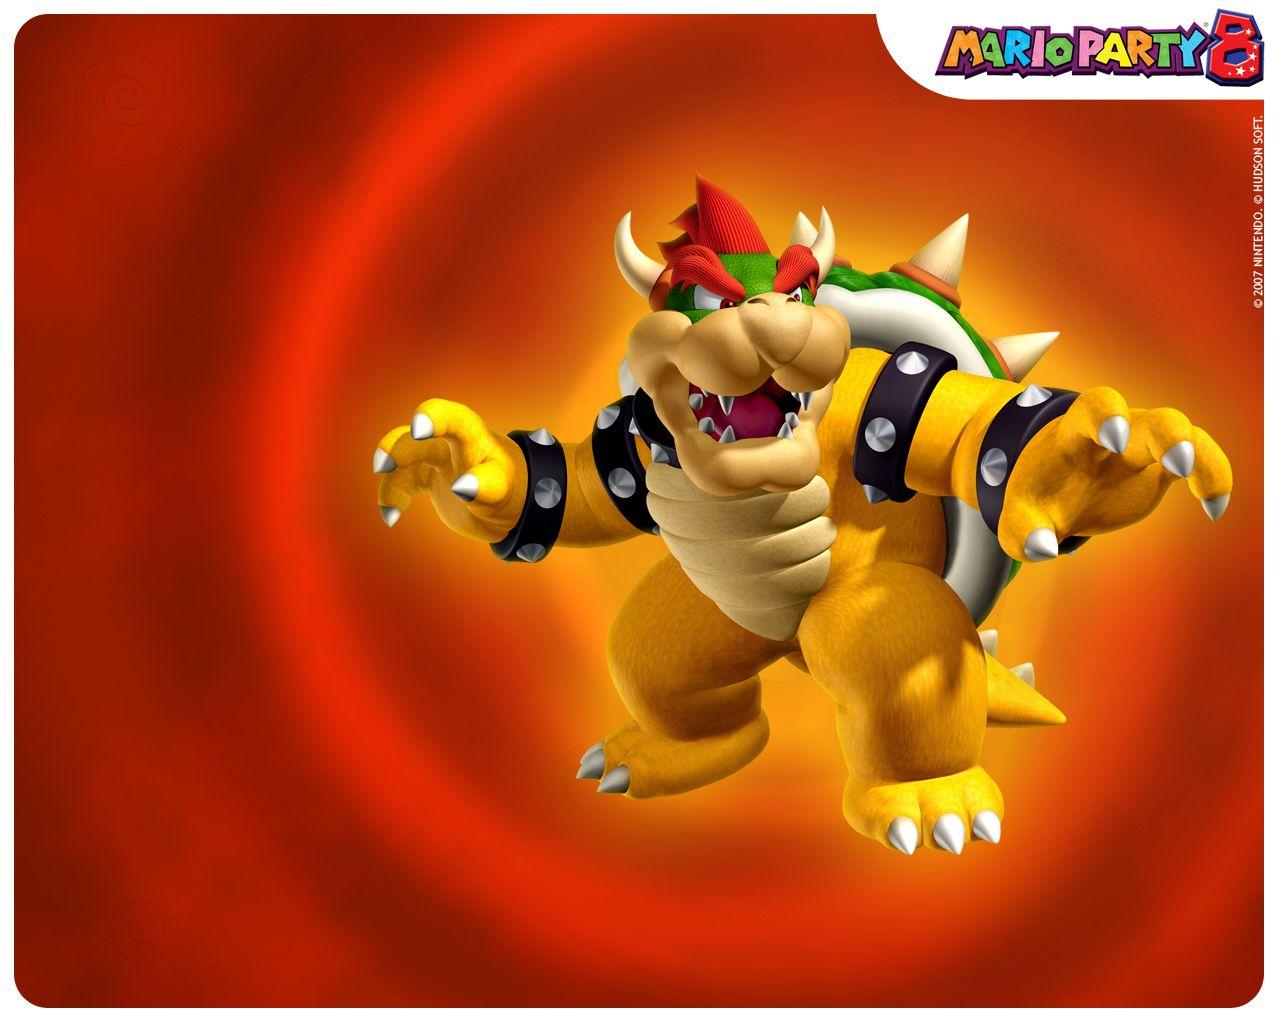 Bowser image Mario Party 8 HD wallpaper and background photo